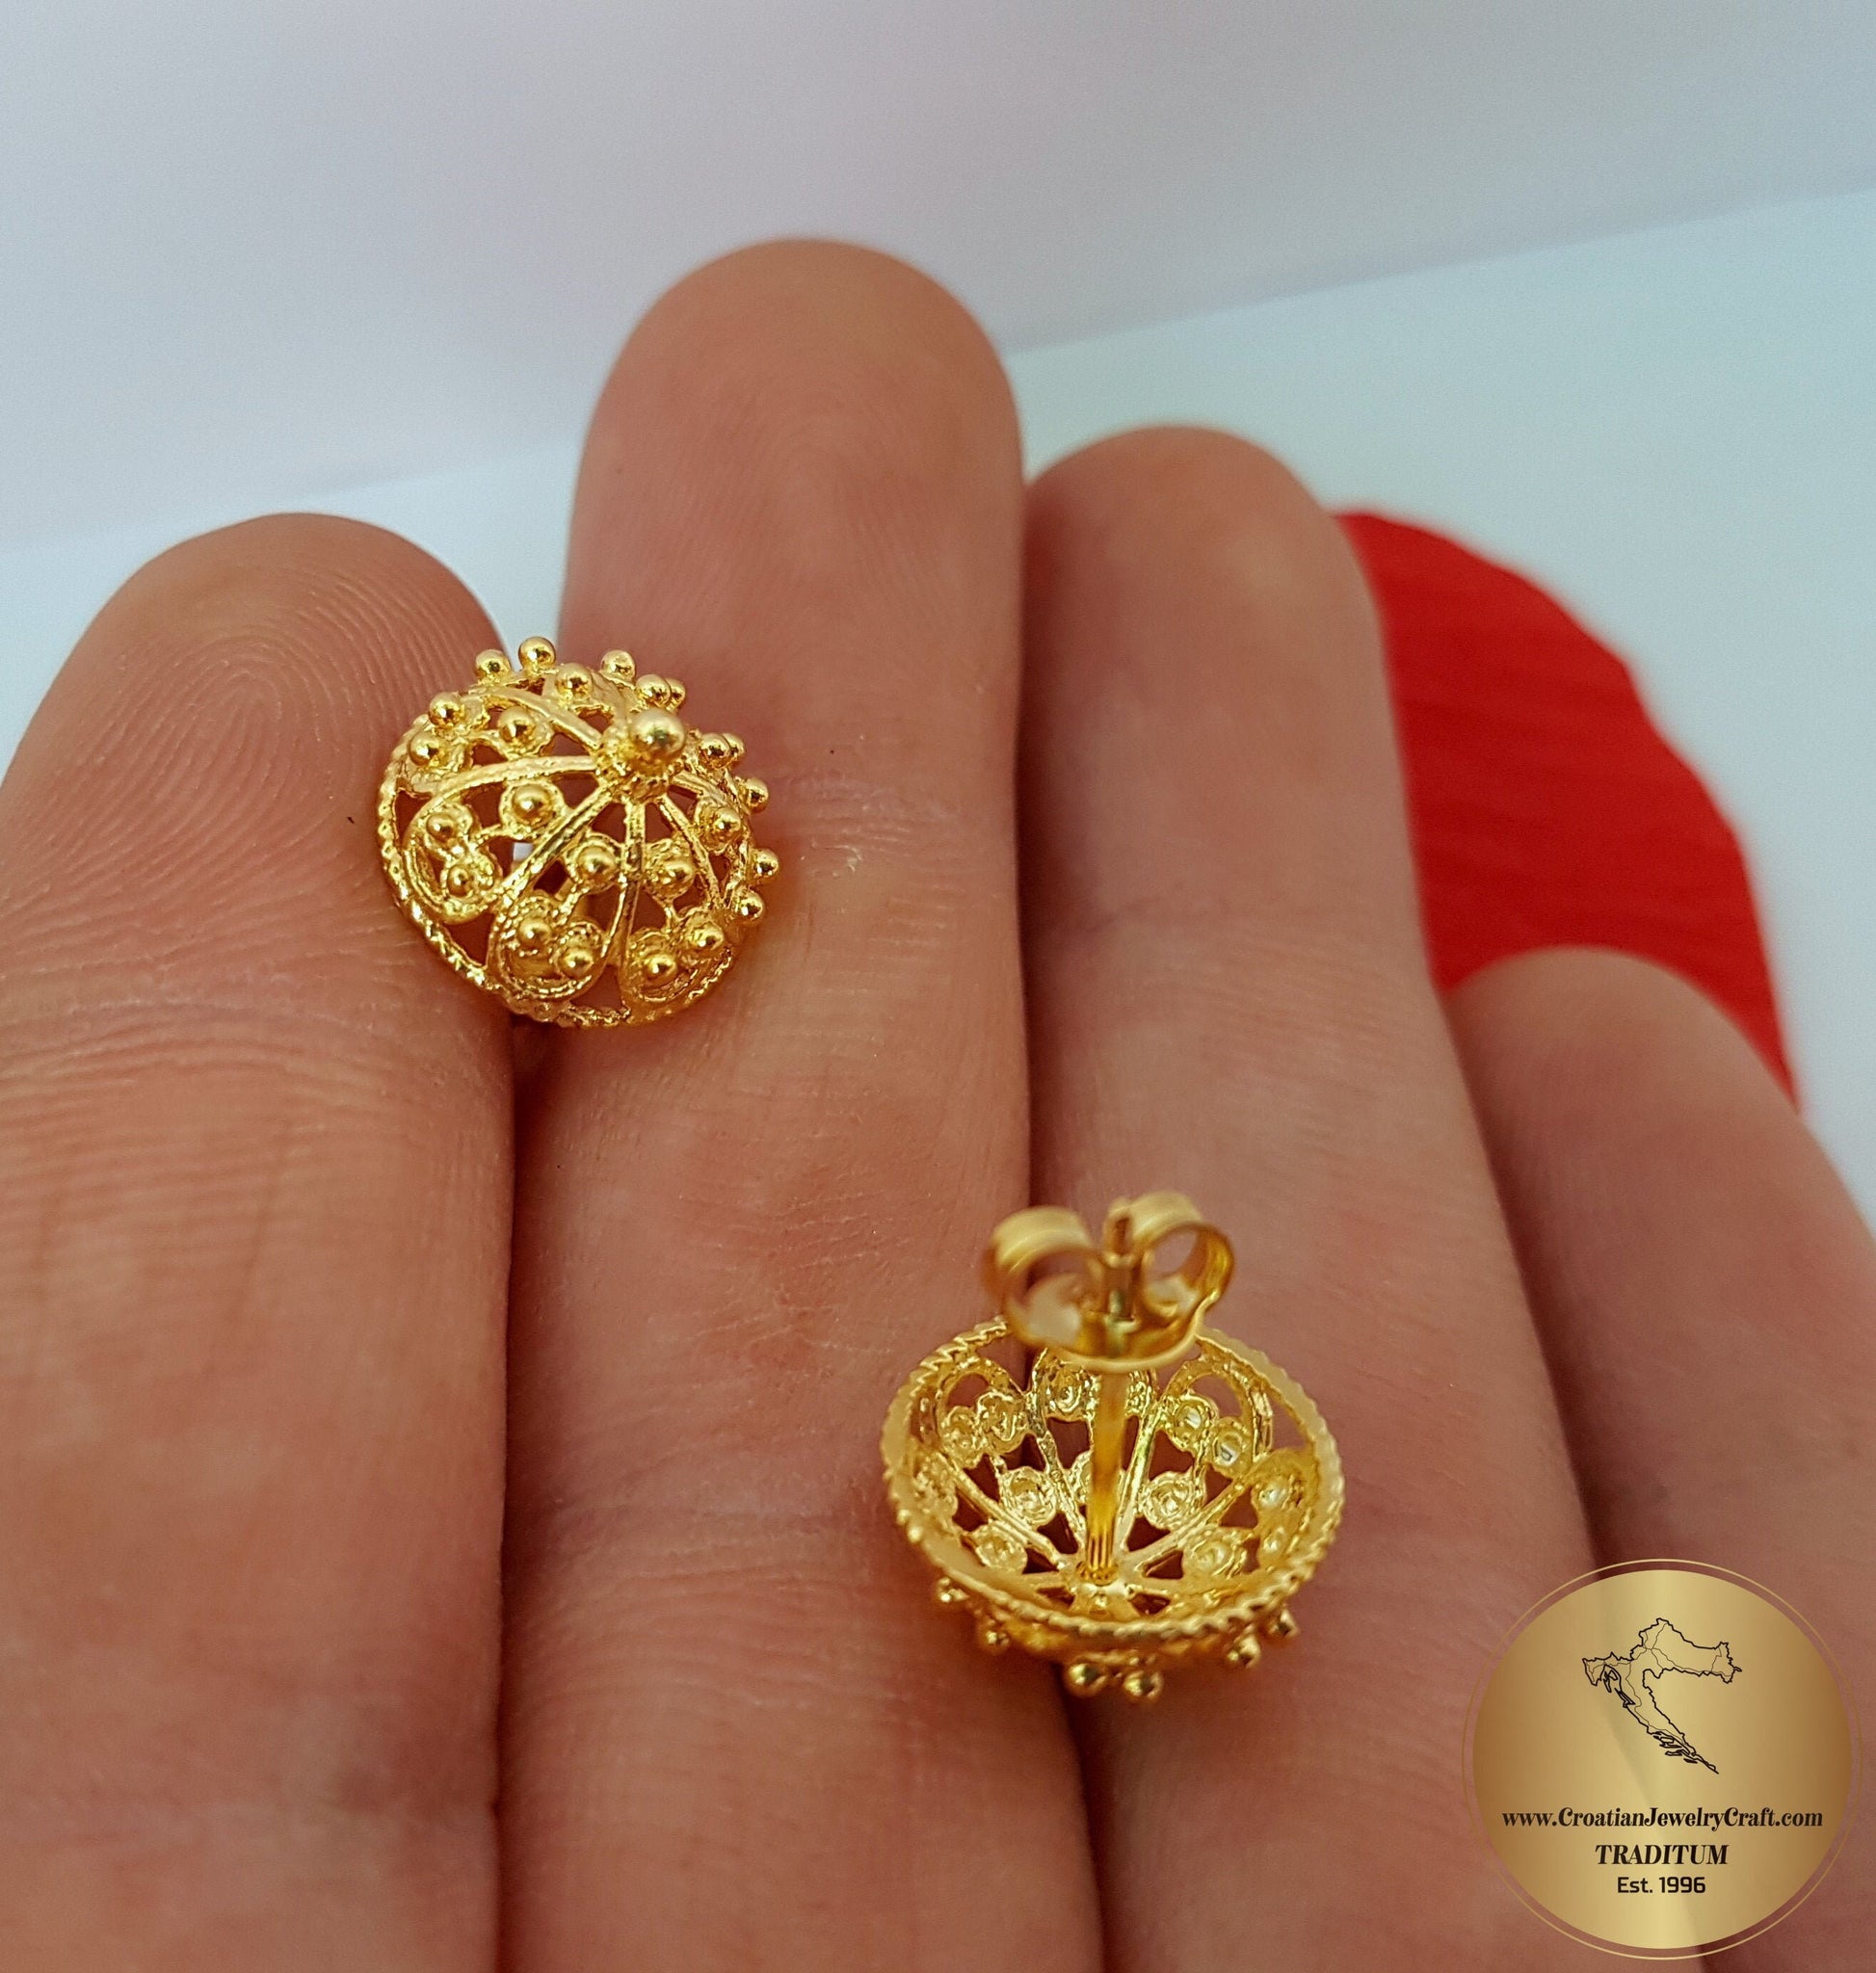 22K Gold Plated Indian Full Ear Earrings With Jhumka Gorgeous Bridal Set d  | eBay